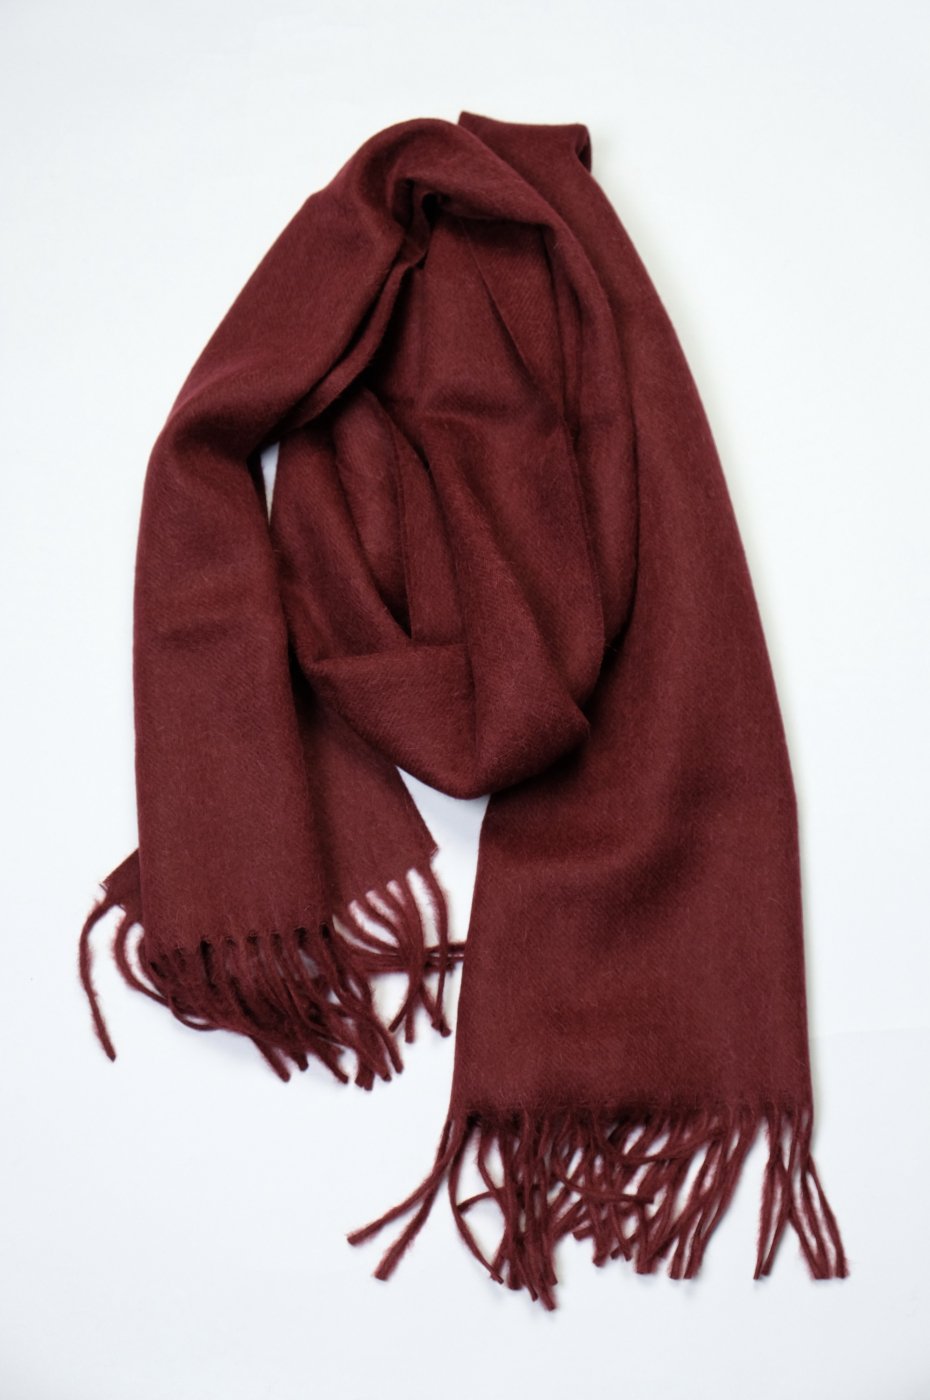 THE INOUE BROTHERS... "BRUSHED SCARF / BURGUNDY"